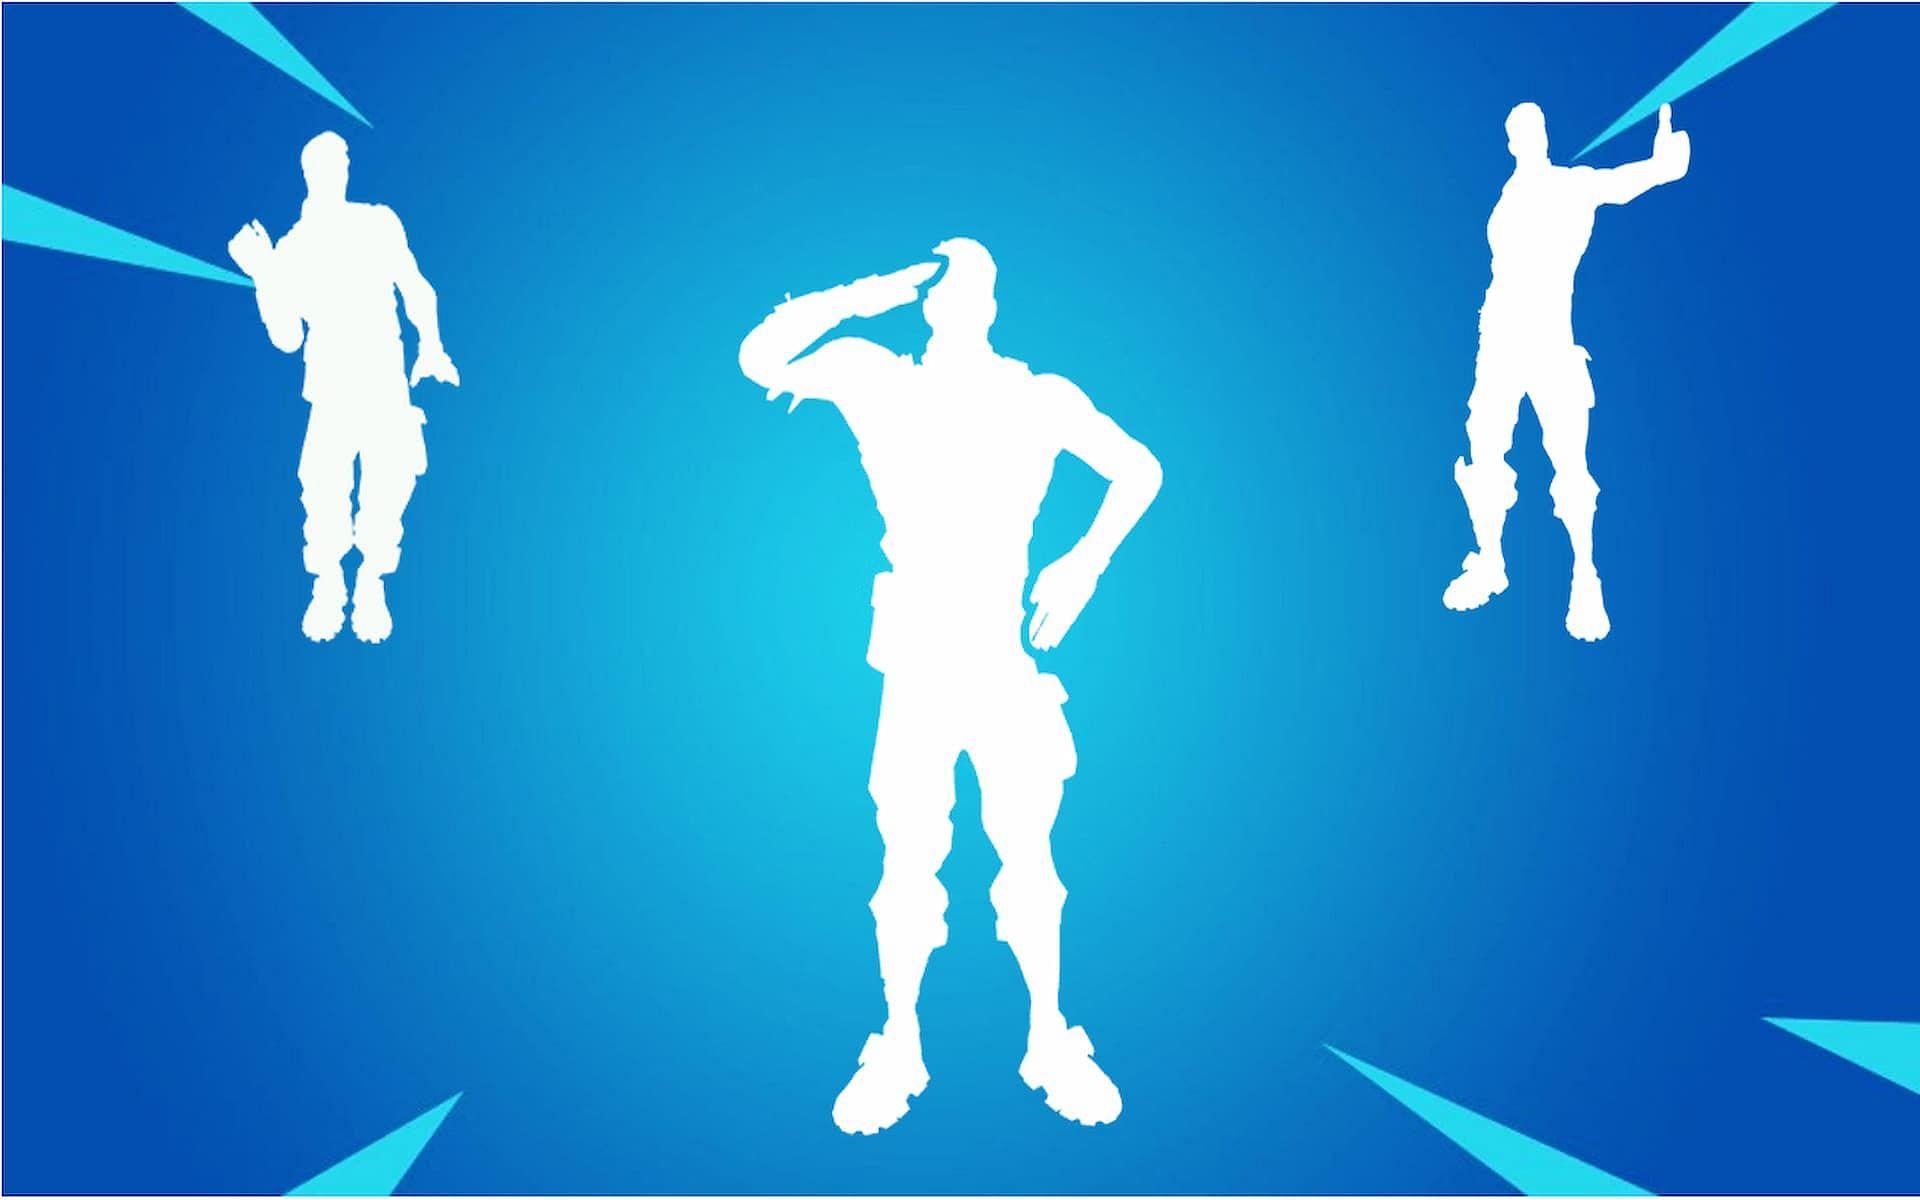 Some of the emotes in Fortnite (Image via Epic Games)